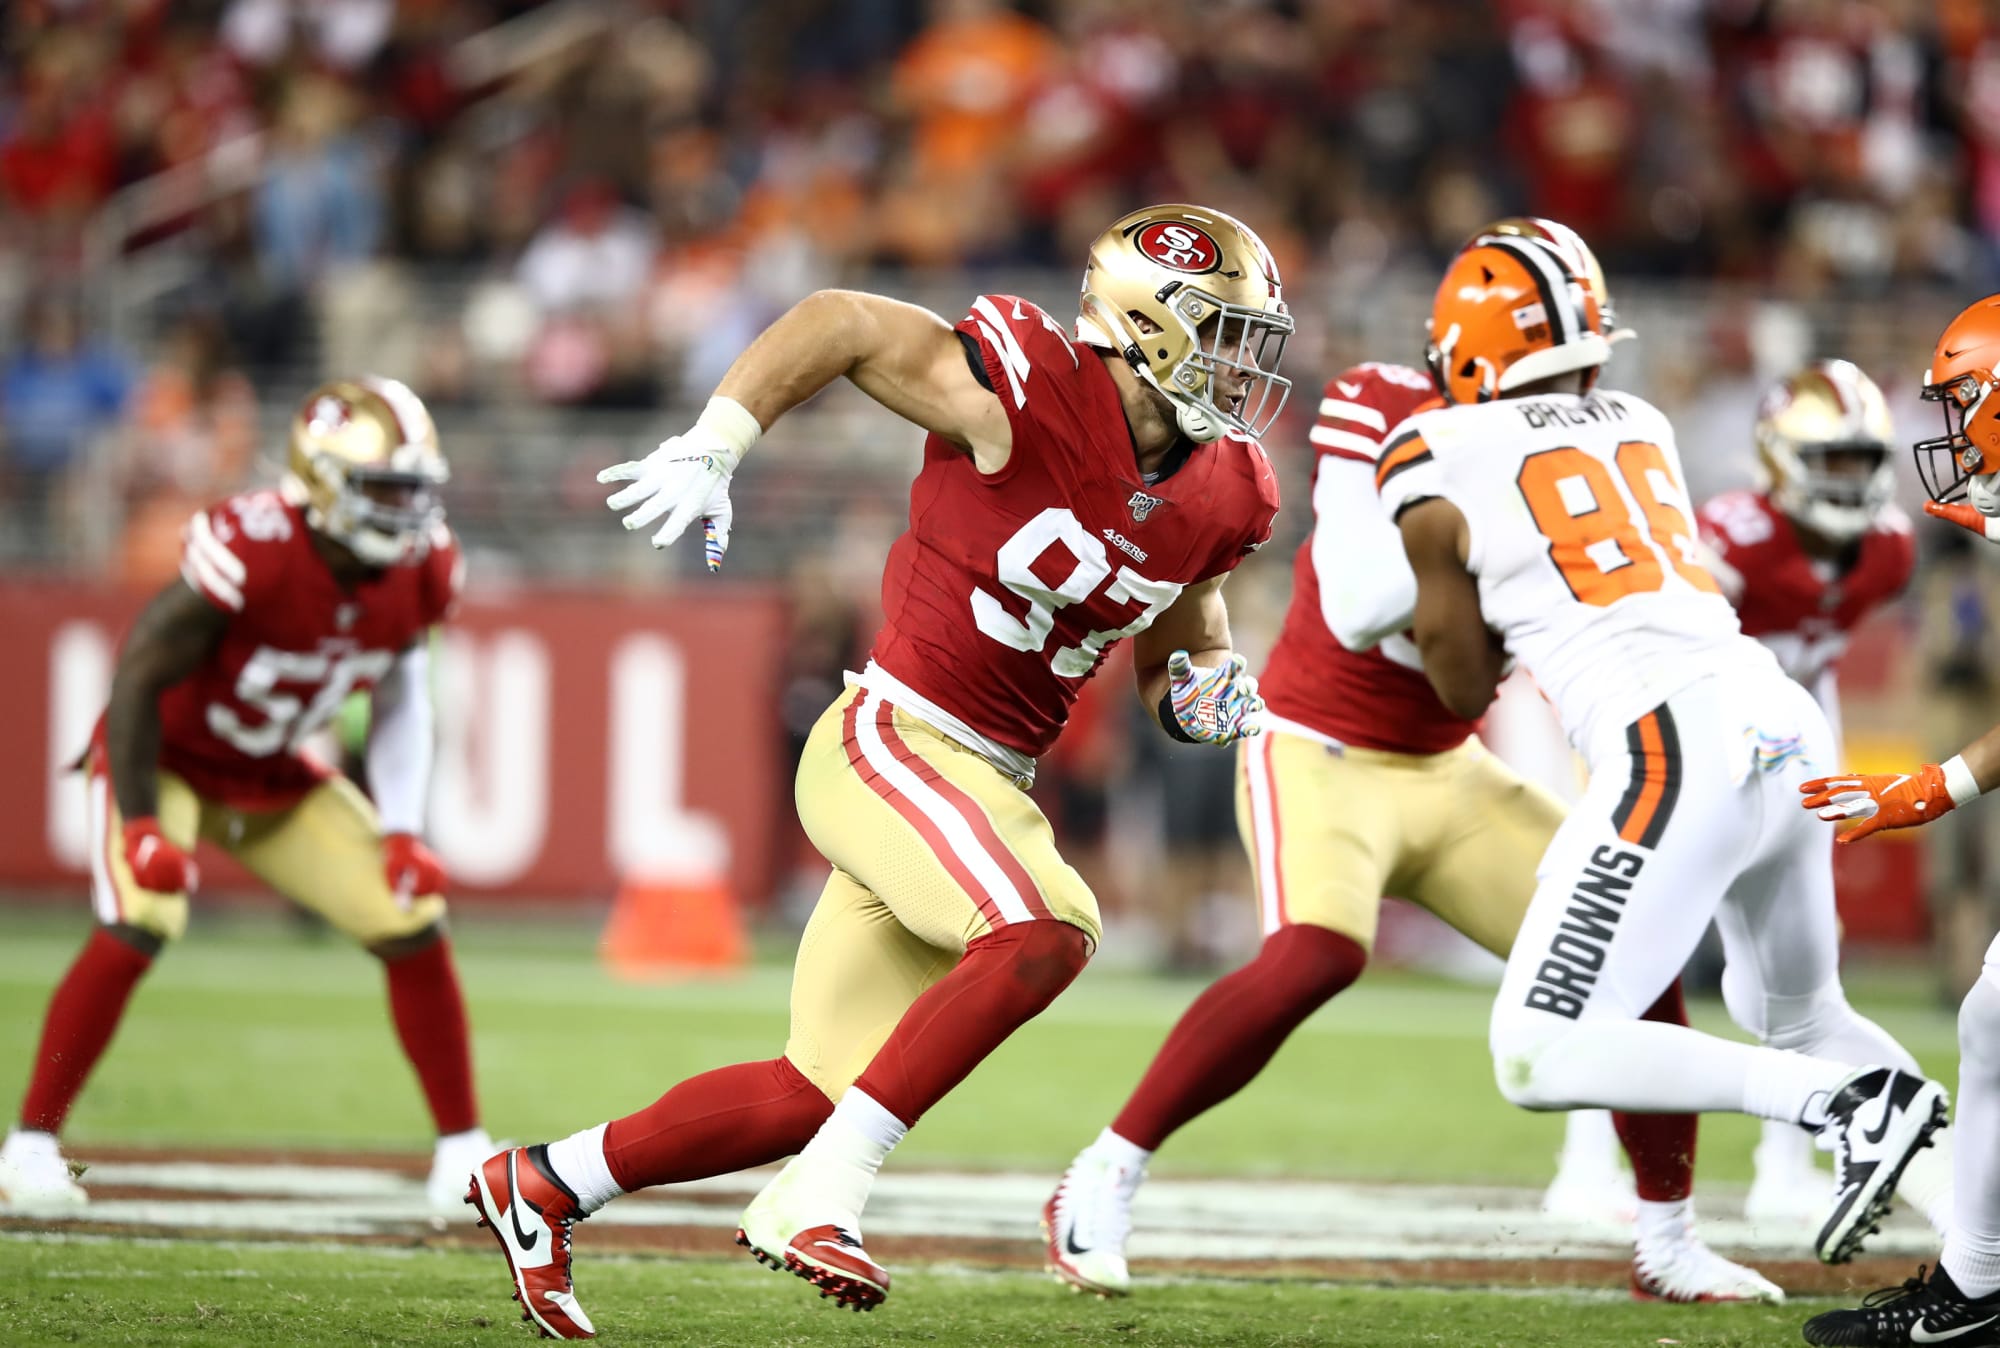 San Francisco 49ers: Nick Bosa earning recognition for his stellar play